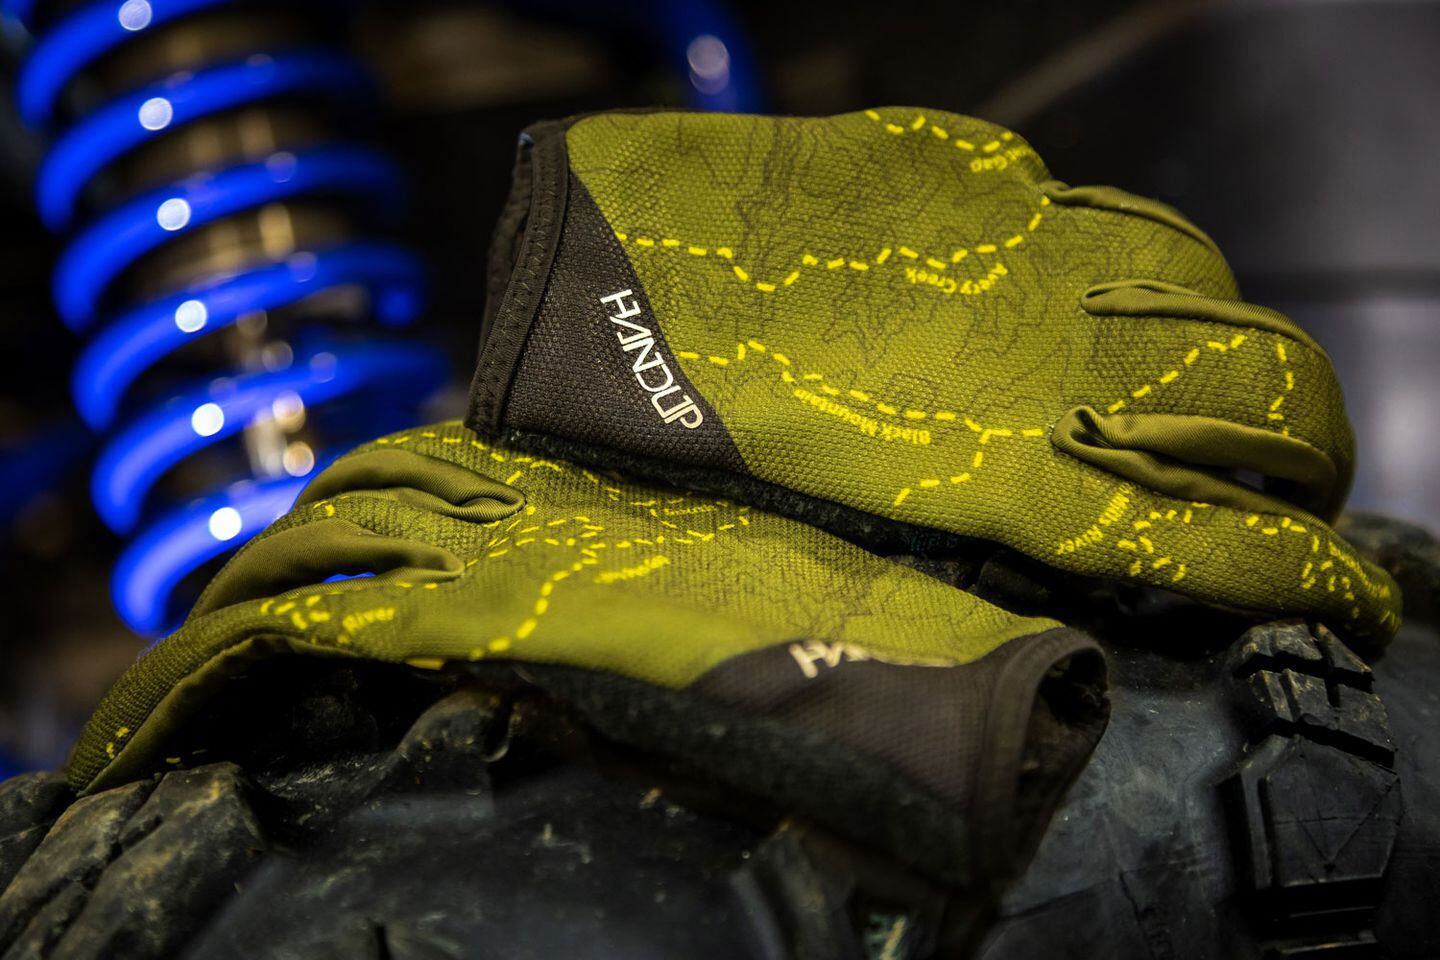 Wrap those fingers with some premium gloves.